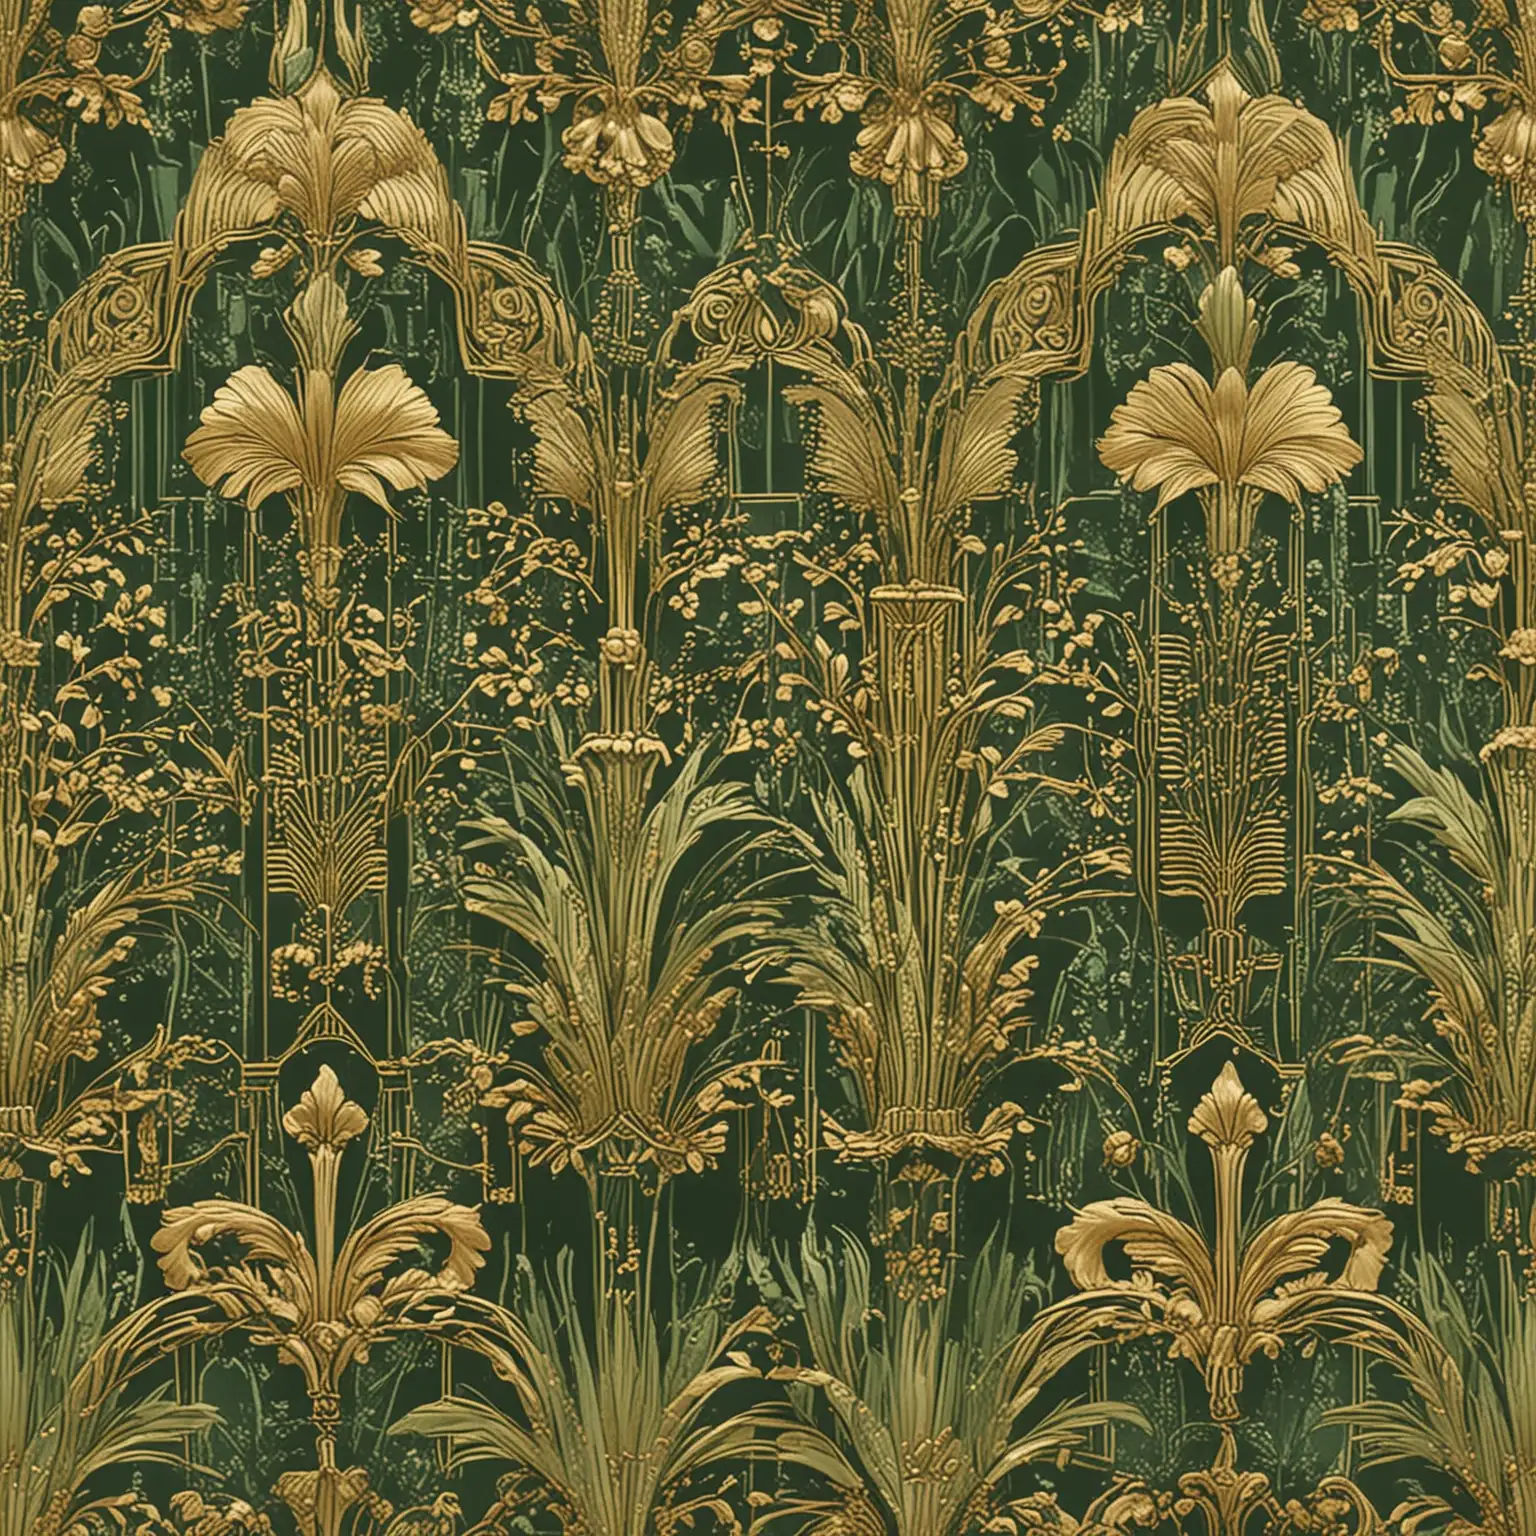 Ornate-Green-and-Gold-Art-Deco-Style-Wallpaper